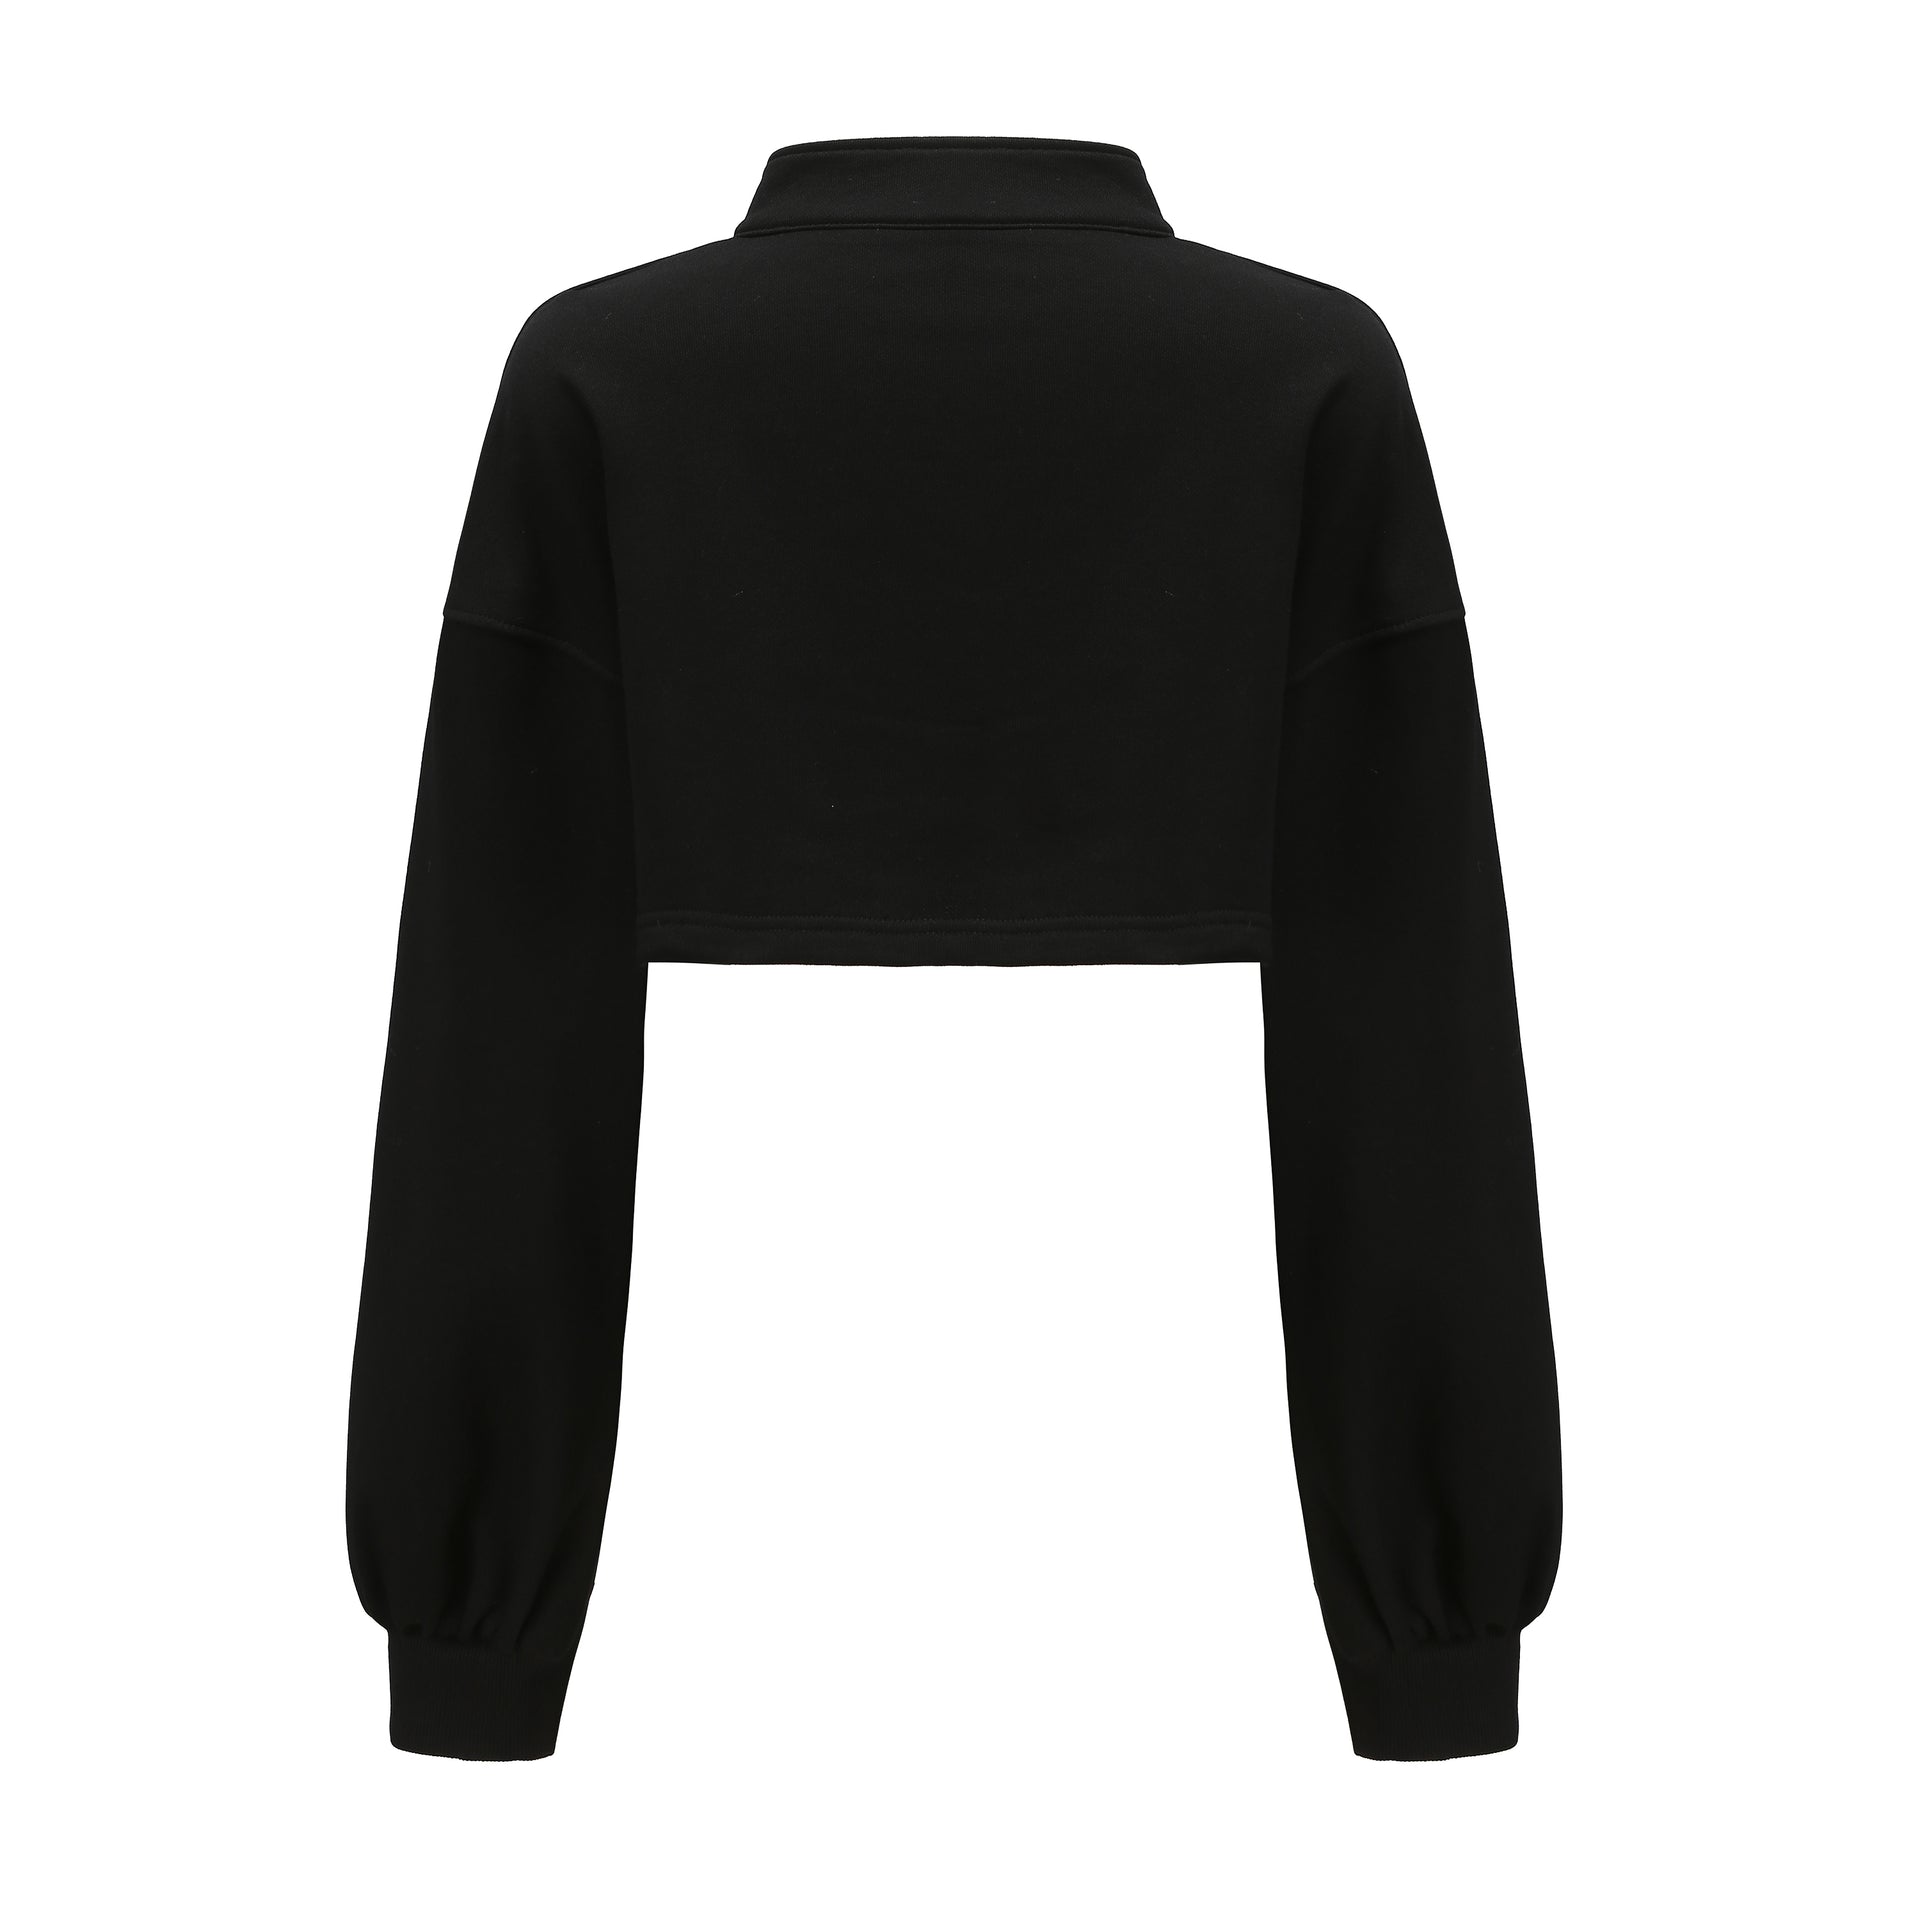 Hei Open Collar Crop Top, Drop Shoulder Oversized Fit, Contrast Color Piping, Center Front Knot Button, Cotton Black, back